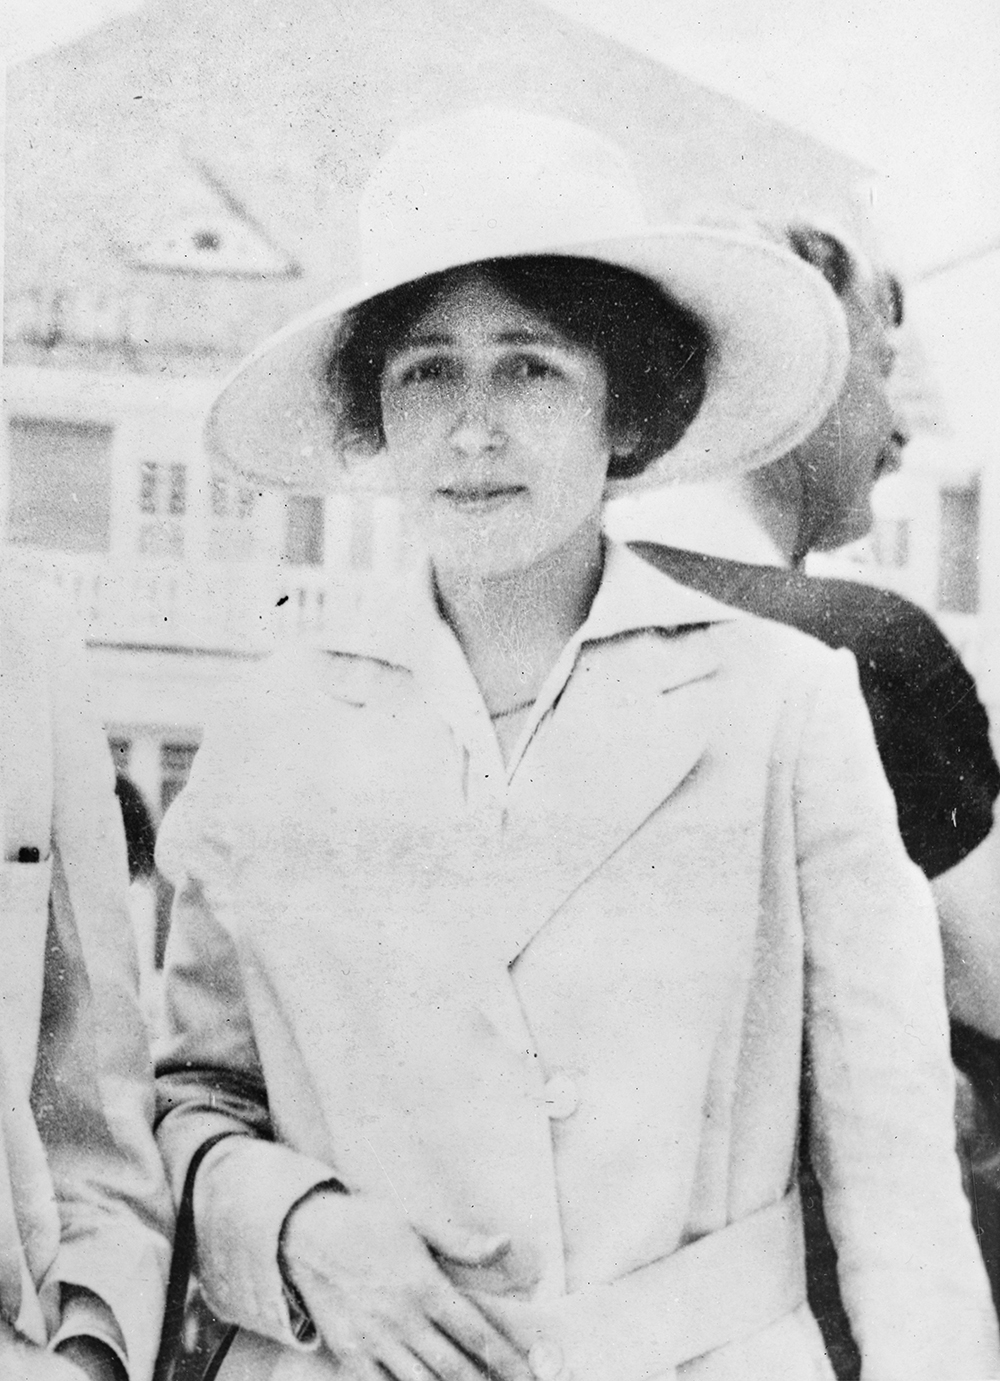 A photograph of a young woman wearing a wide-brimmed hat and a jacket.